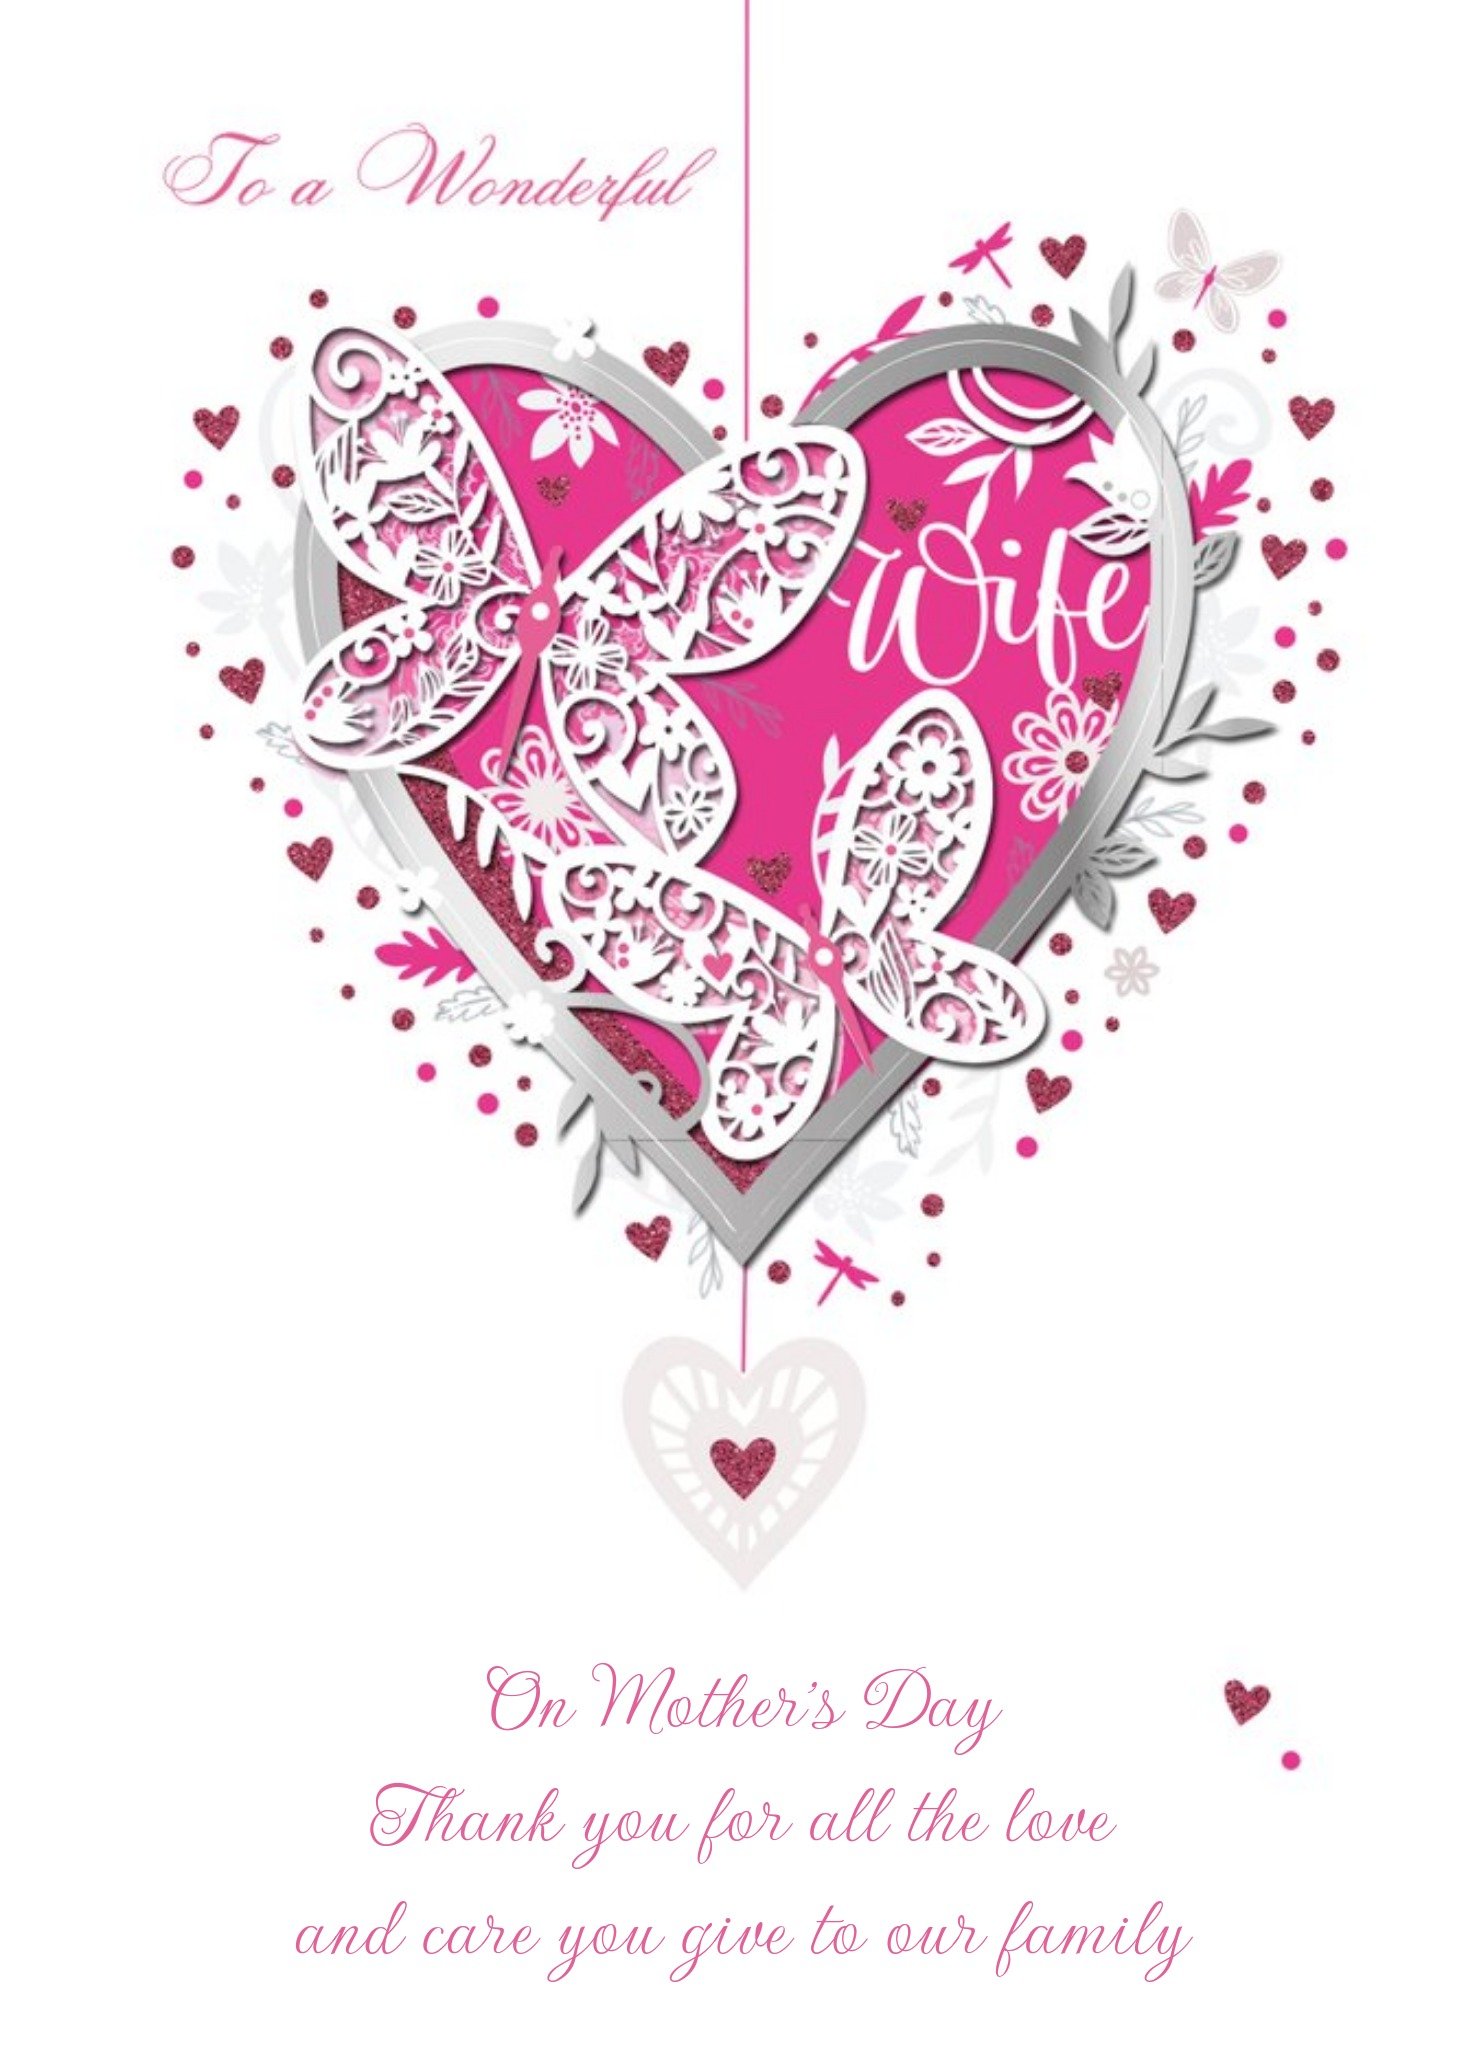 Ling Design Big Pink Heart And Butterflies To A Wonderful Wife On Mothers Day Card Ecard